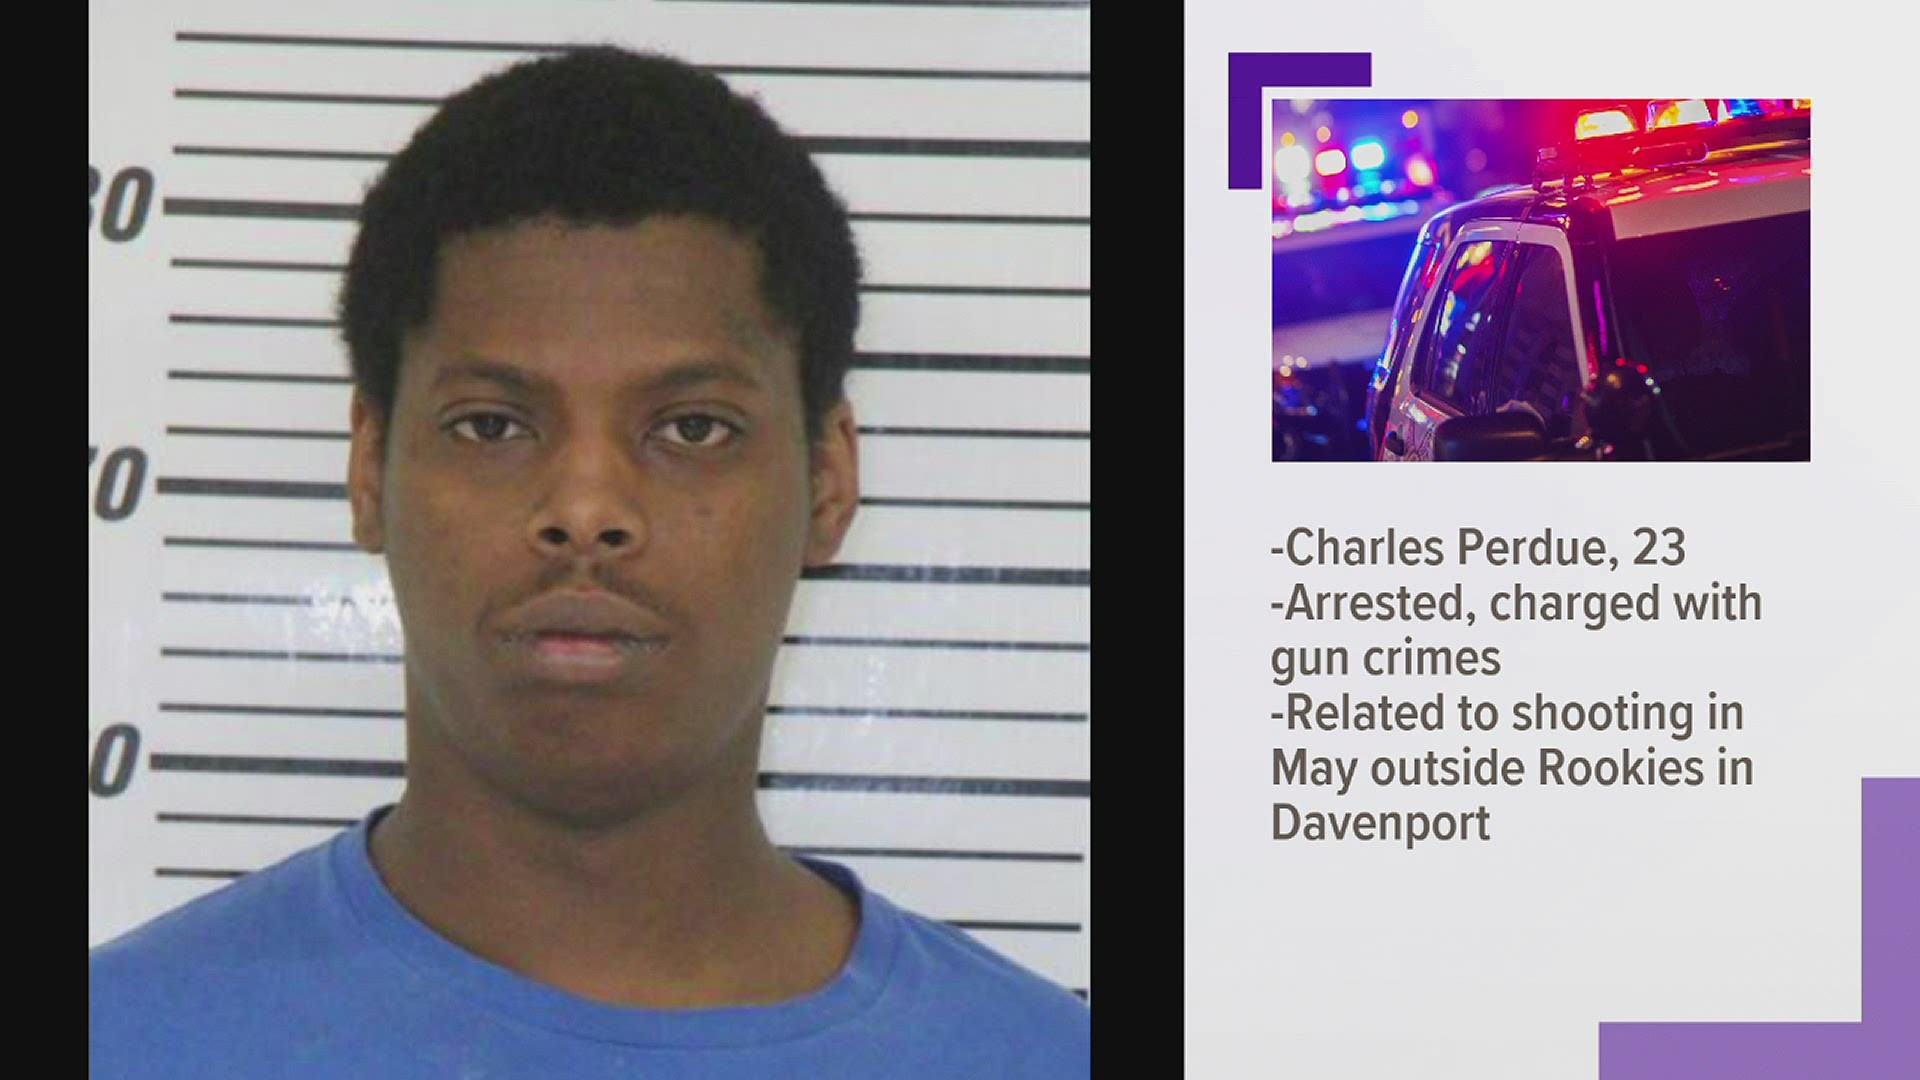 A suspect in a shooting that took place at Rookie's Sports Bar and Grill in late May was apprehended by Davenport Police.